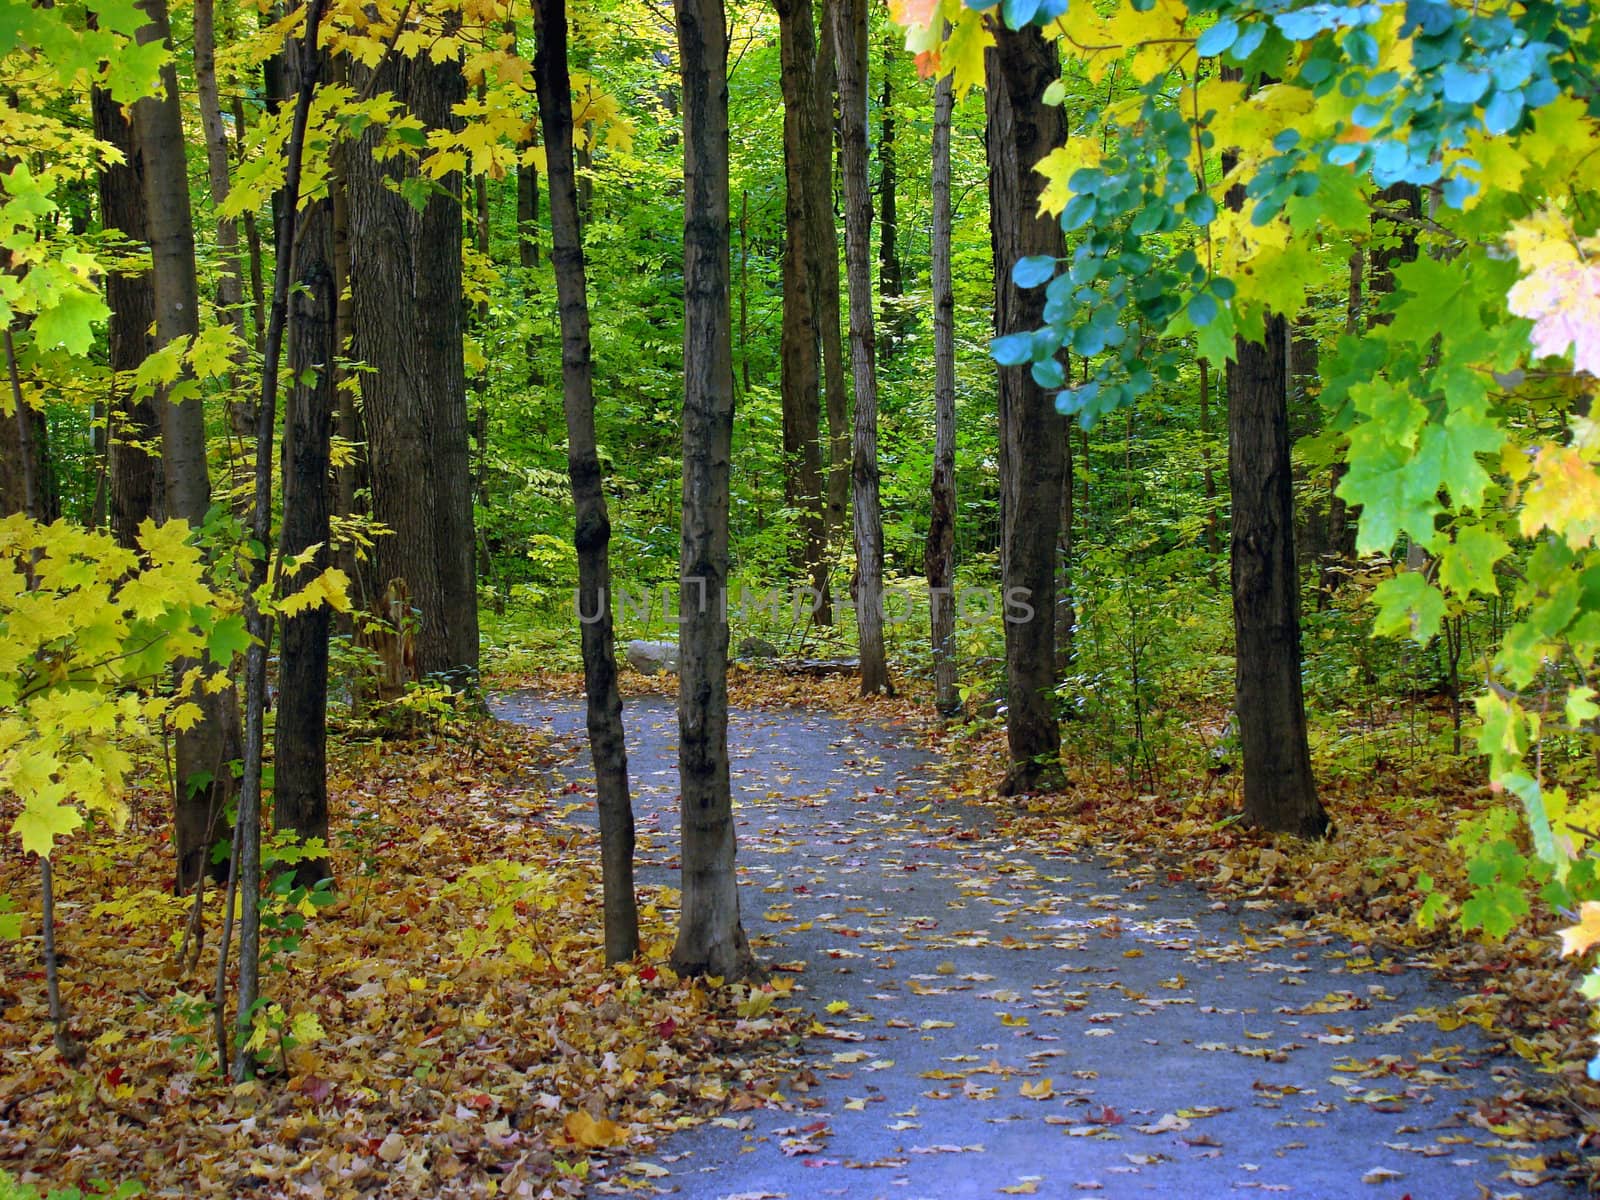 Trail in the forest. Beautiful fall season in Canada.